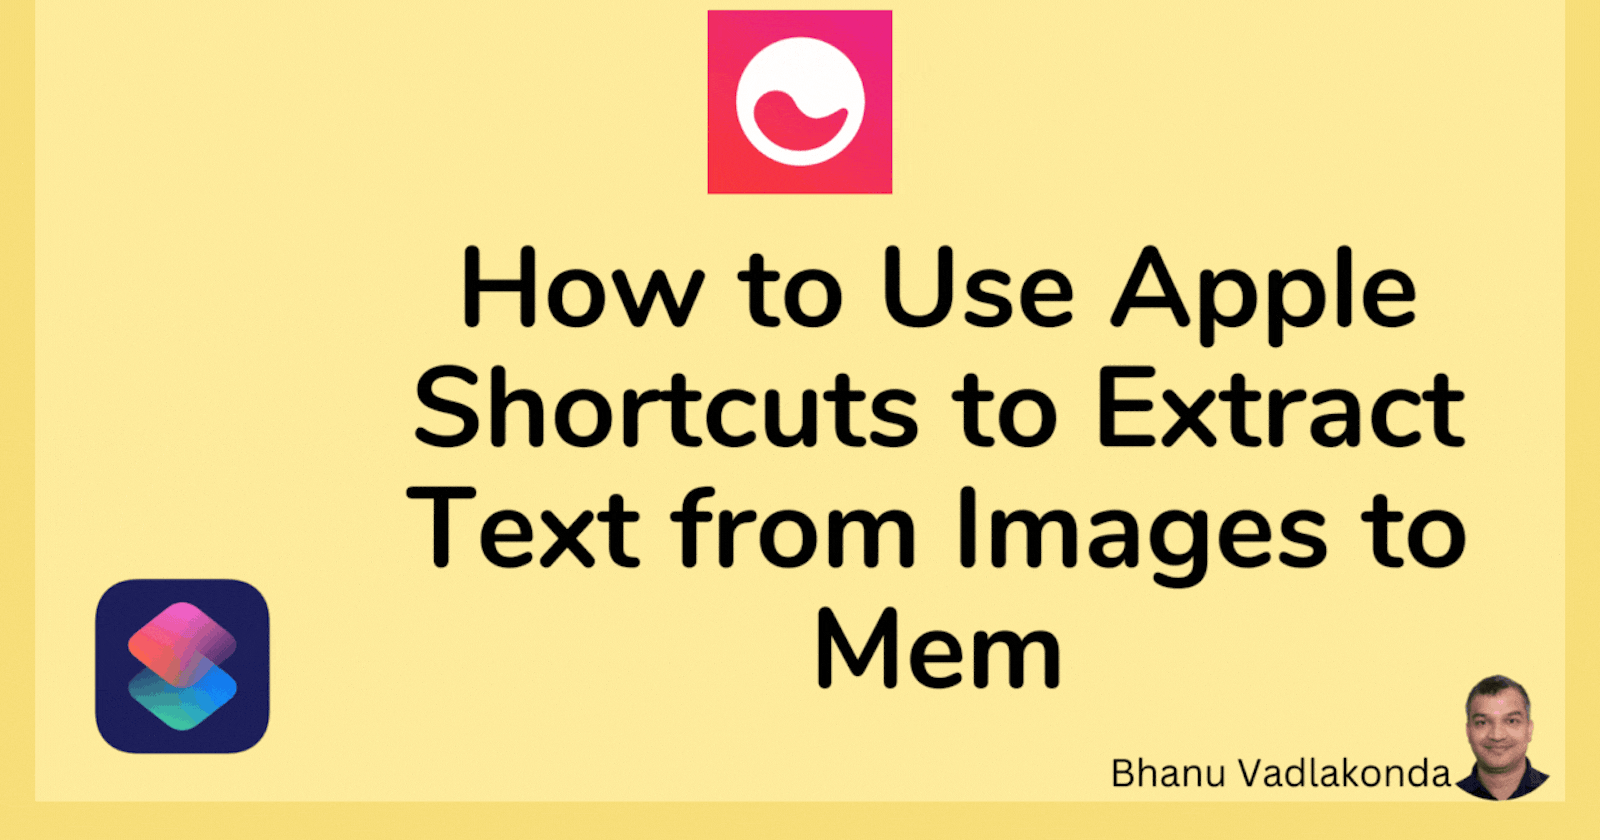 How to Use Apple Shortcuts to Extract Text from Images